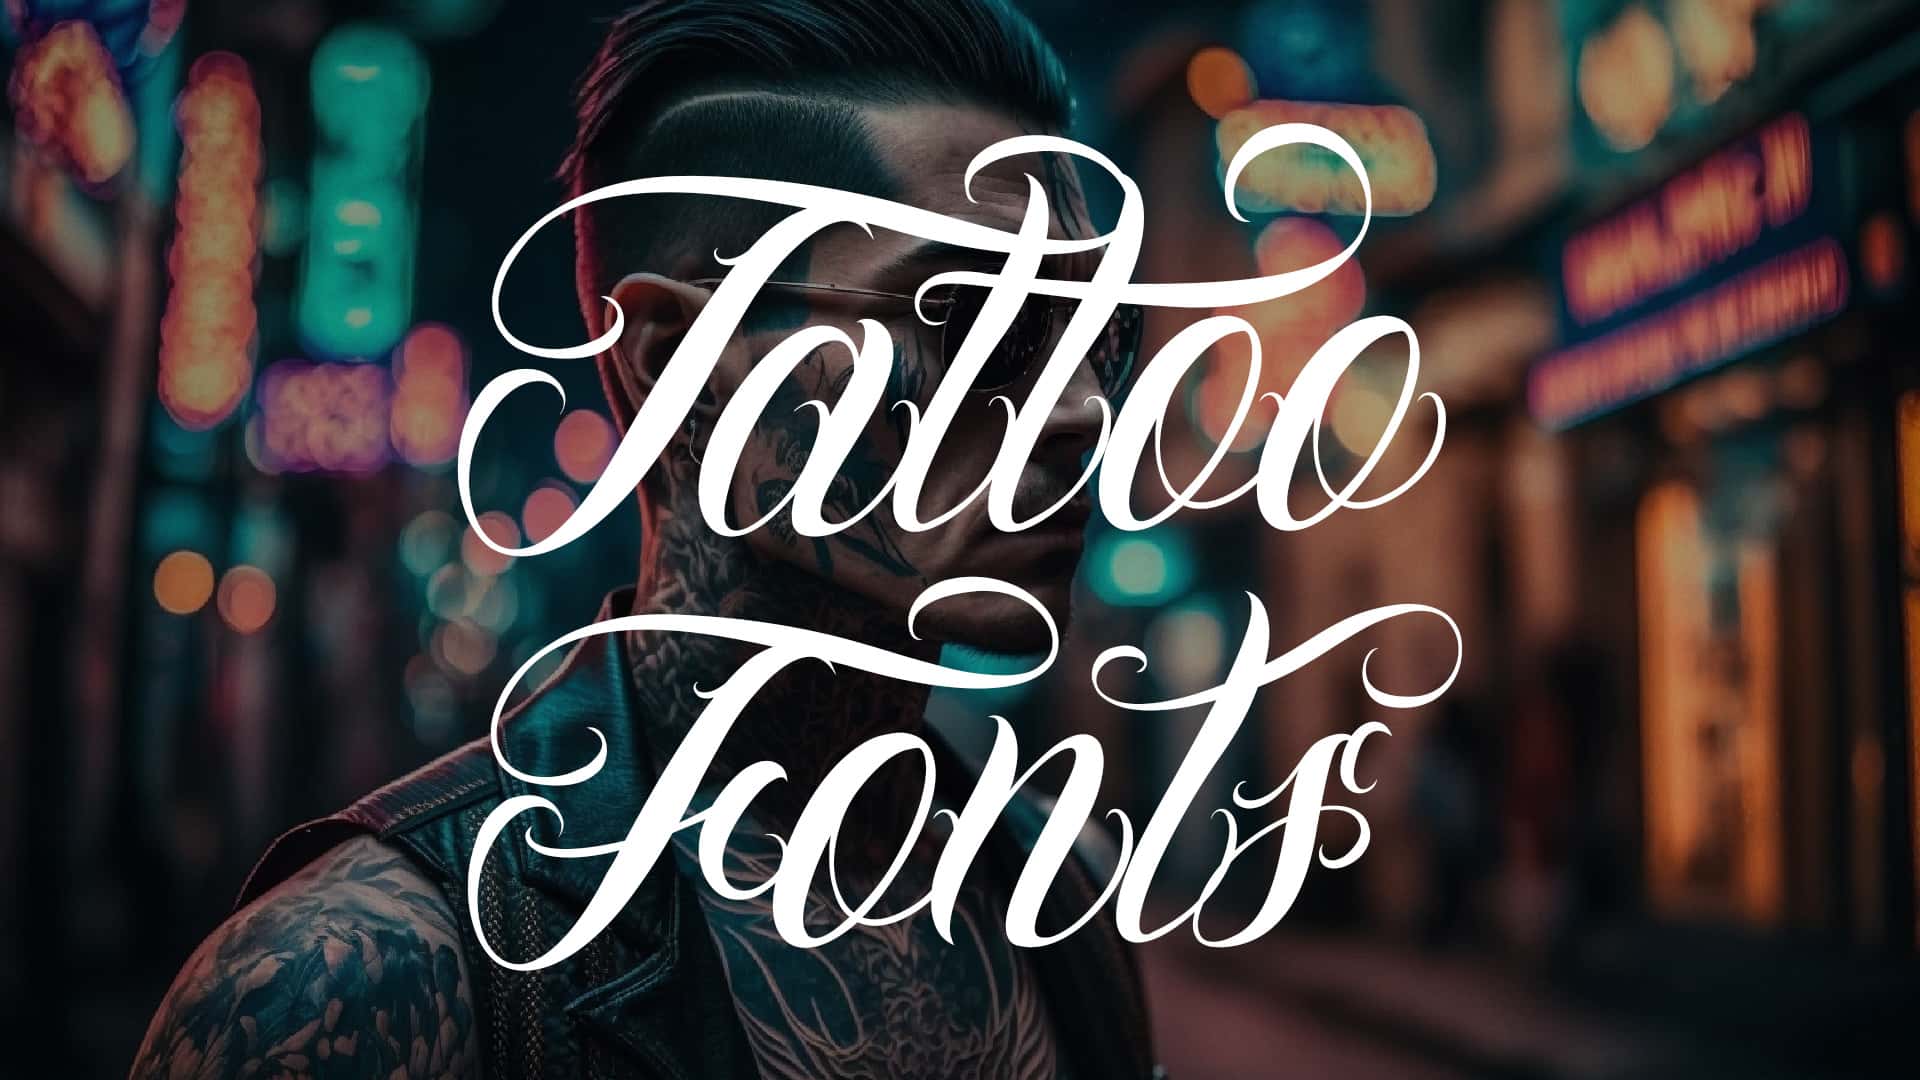 44 Tattoo Fonts To Ink Your Designs in Style